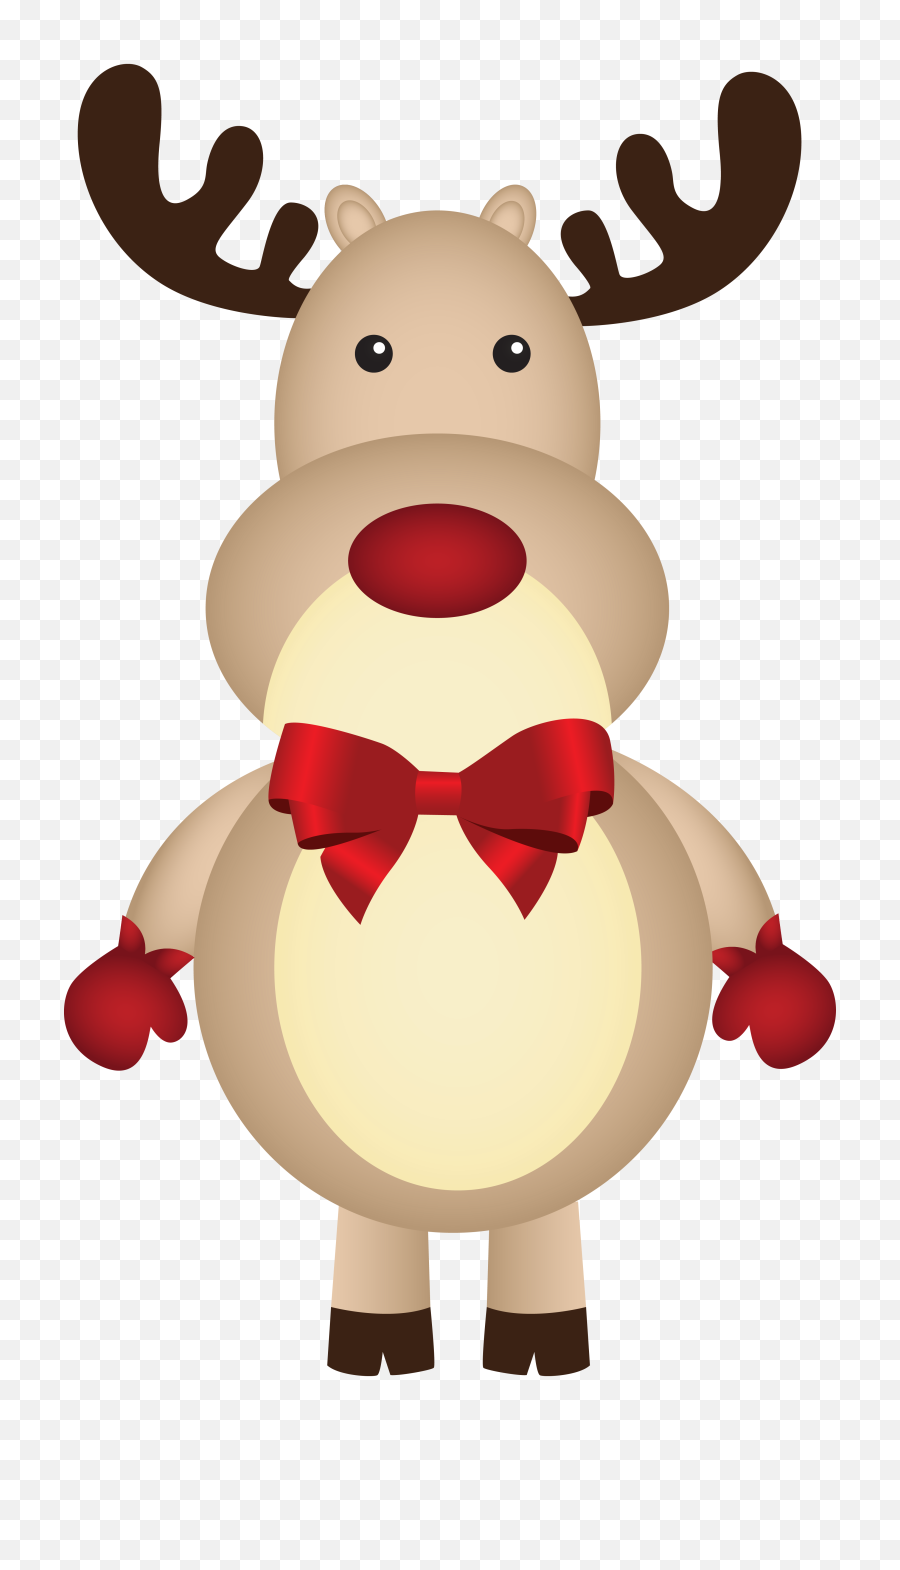 Christmas Rudolph With Bow Png Clipart Image - Christmas,Christmas Bow Png